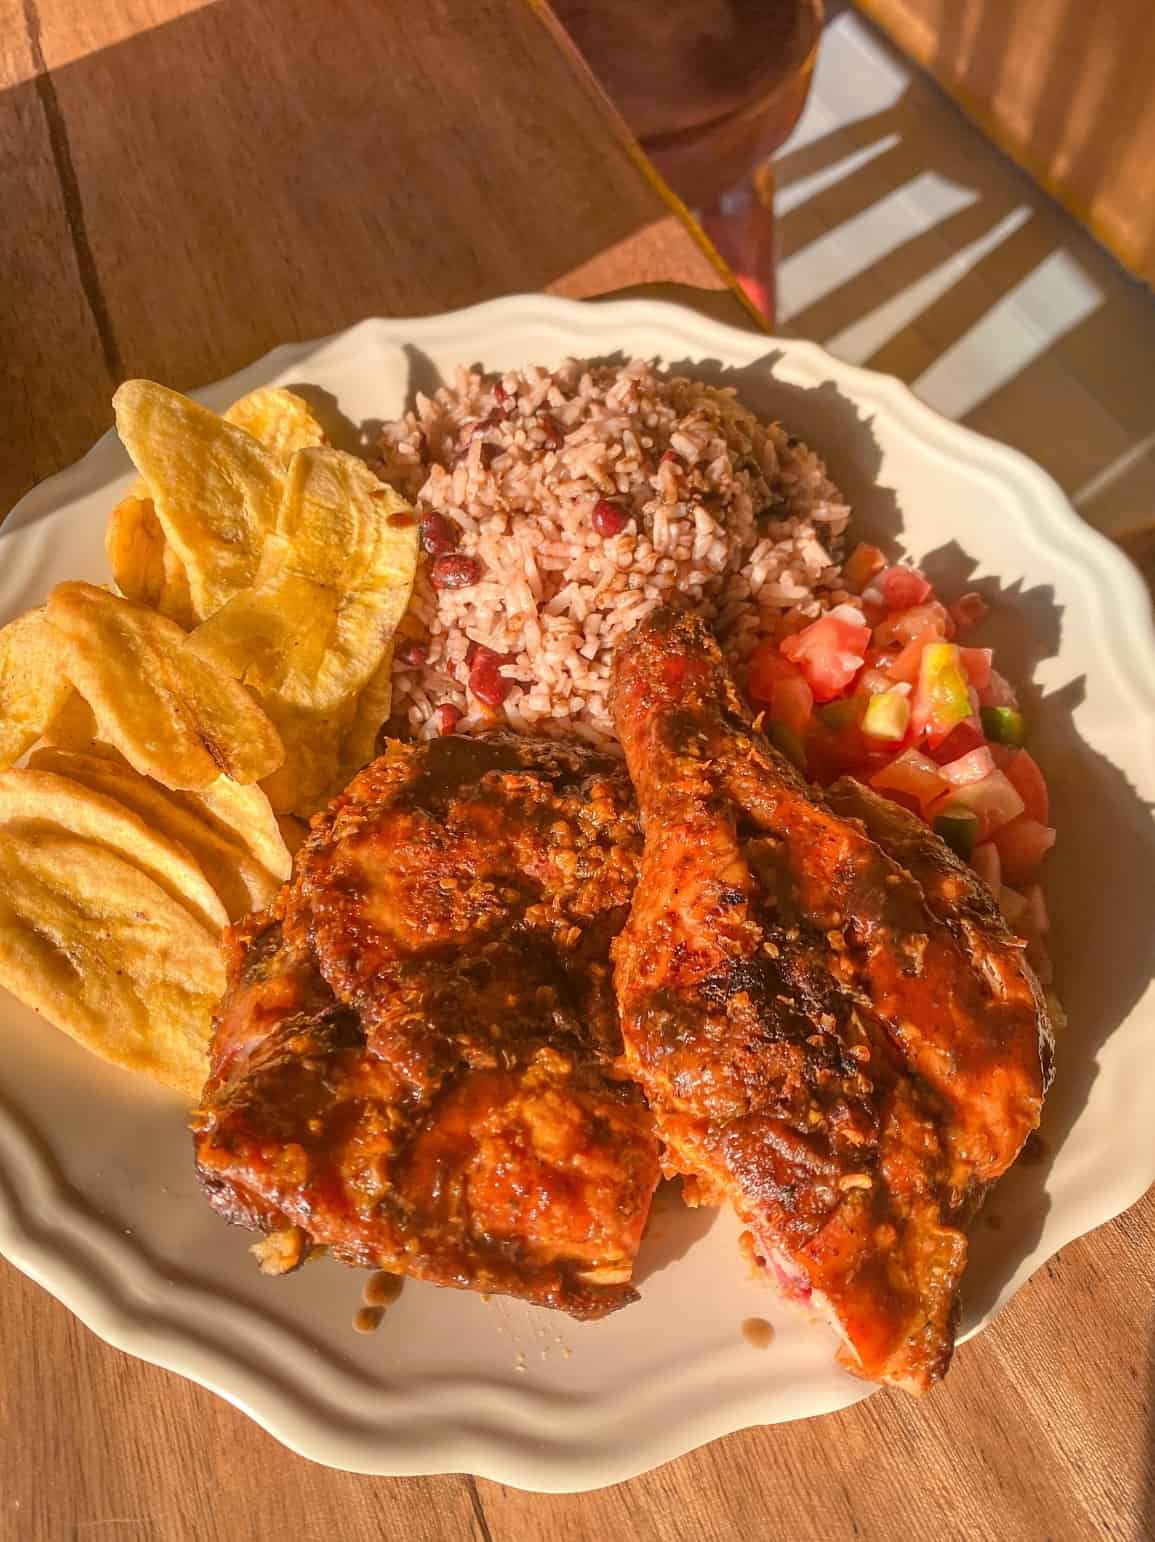 Jerk chicken and fried platains from Anthony's Chicken in Roatan